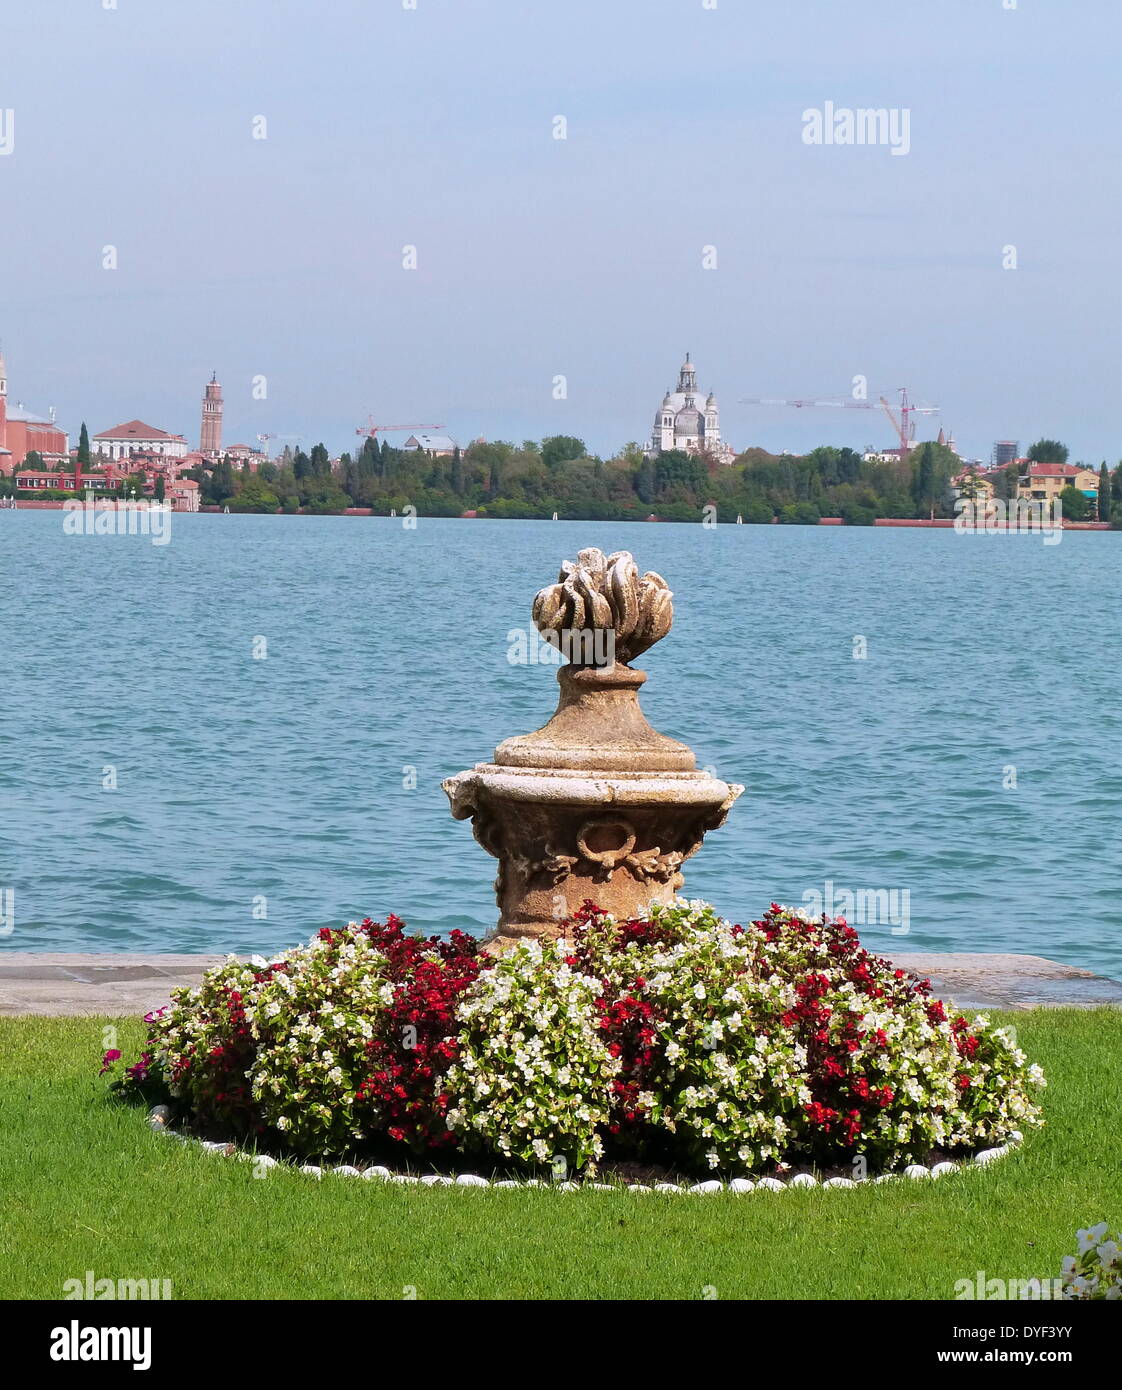 Flower Display by Water 2013. Stock Photo